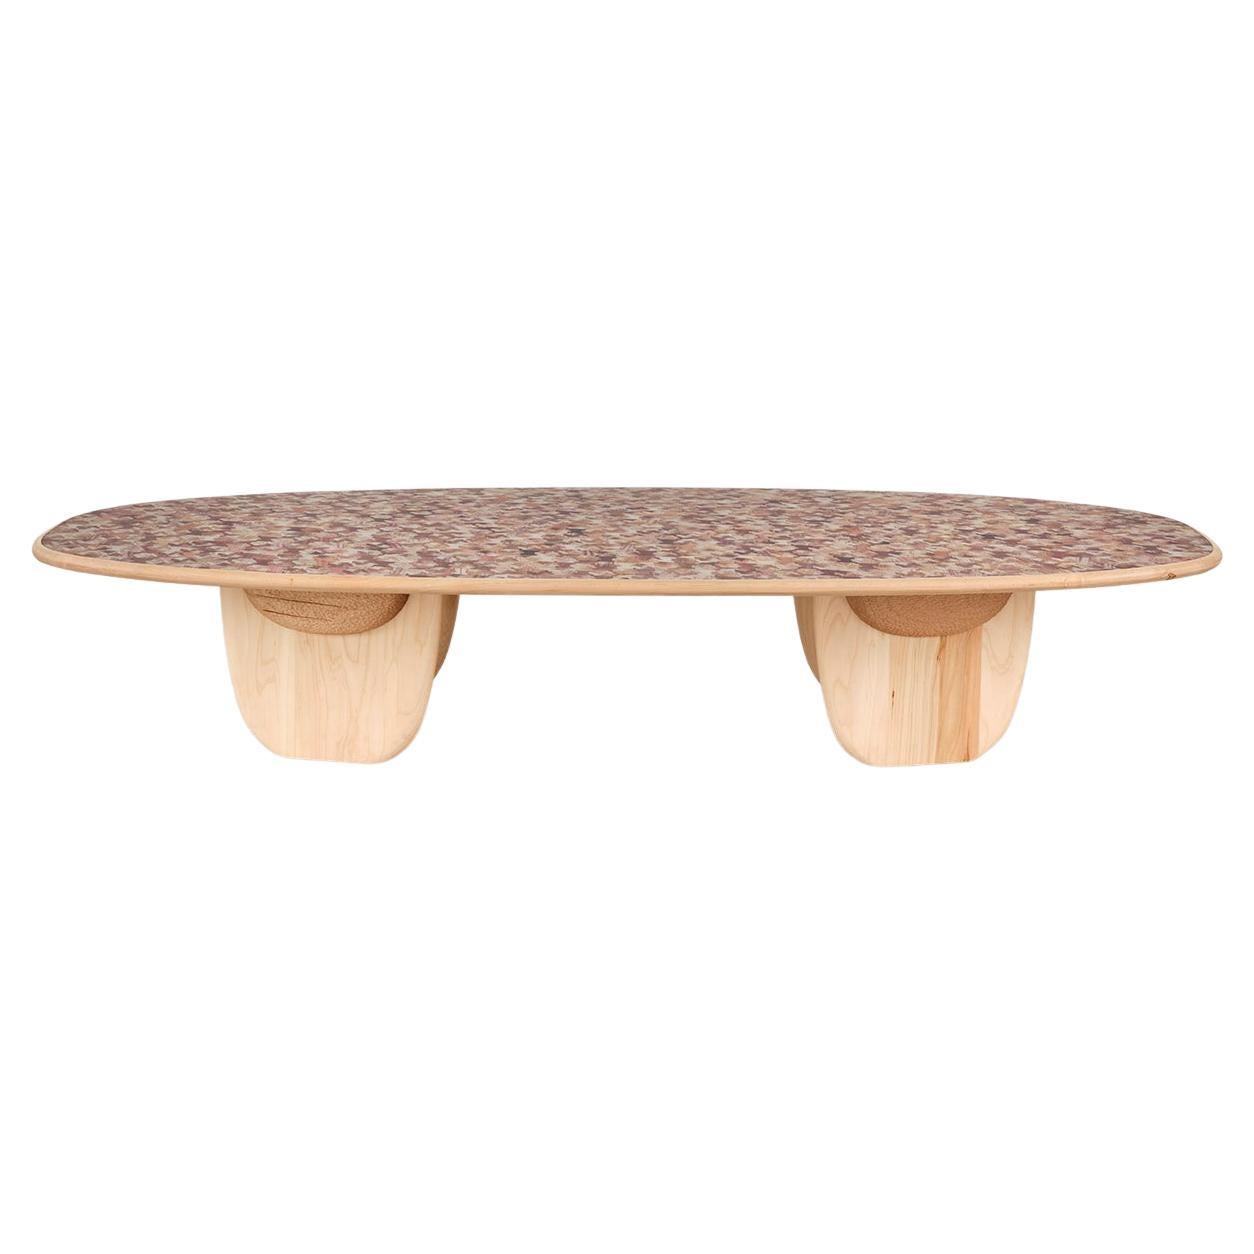 Fernando Laposse, Totomoxtle Snake Coffee Table For Sale